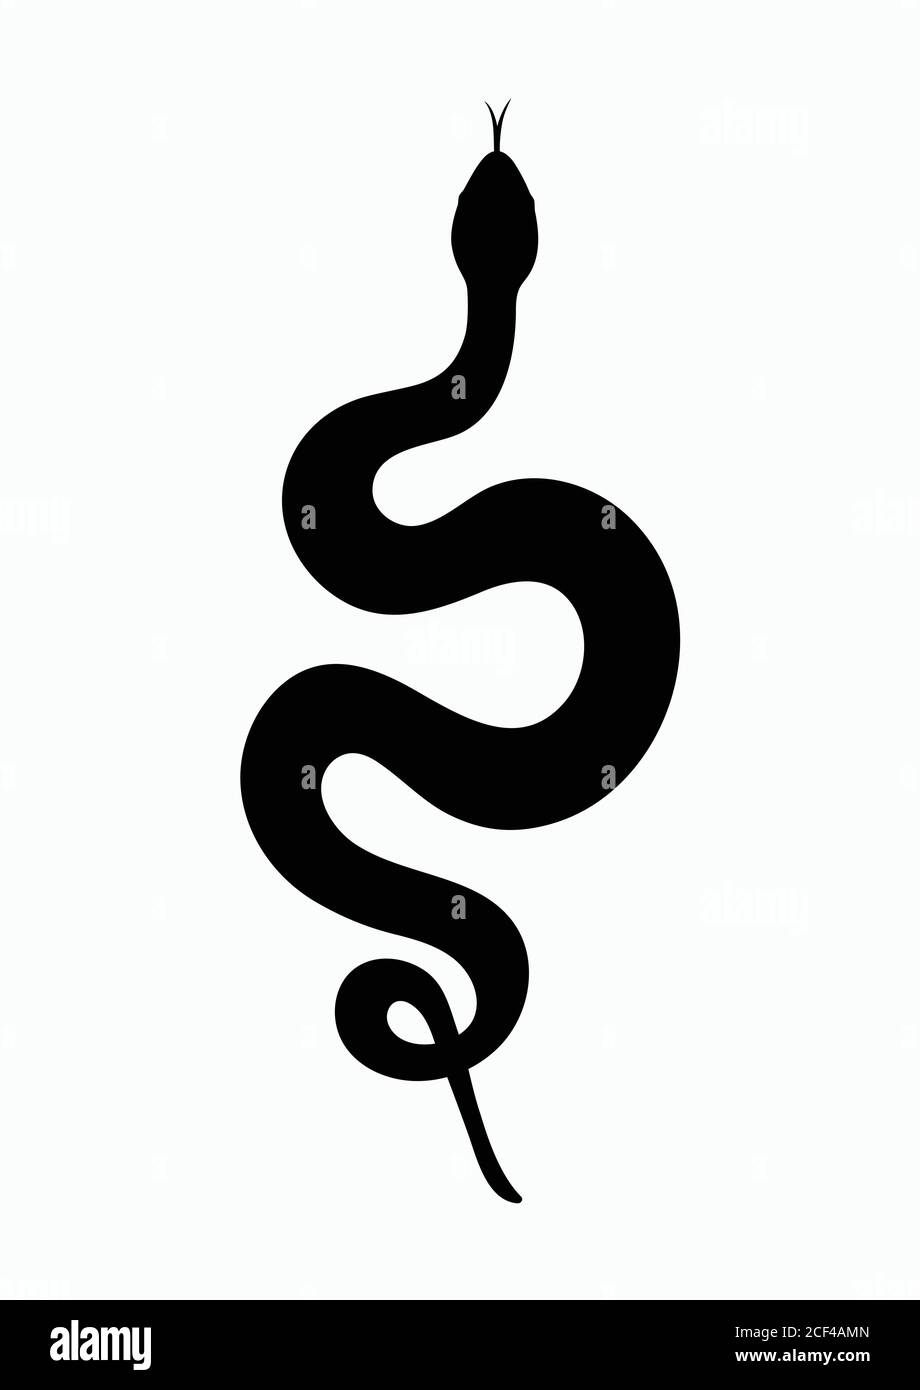 Black silhouette snake. Isolated symbol or icon snake on white background. Abstract sign snake. Vector illustration. Stock Vector